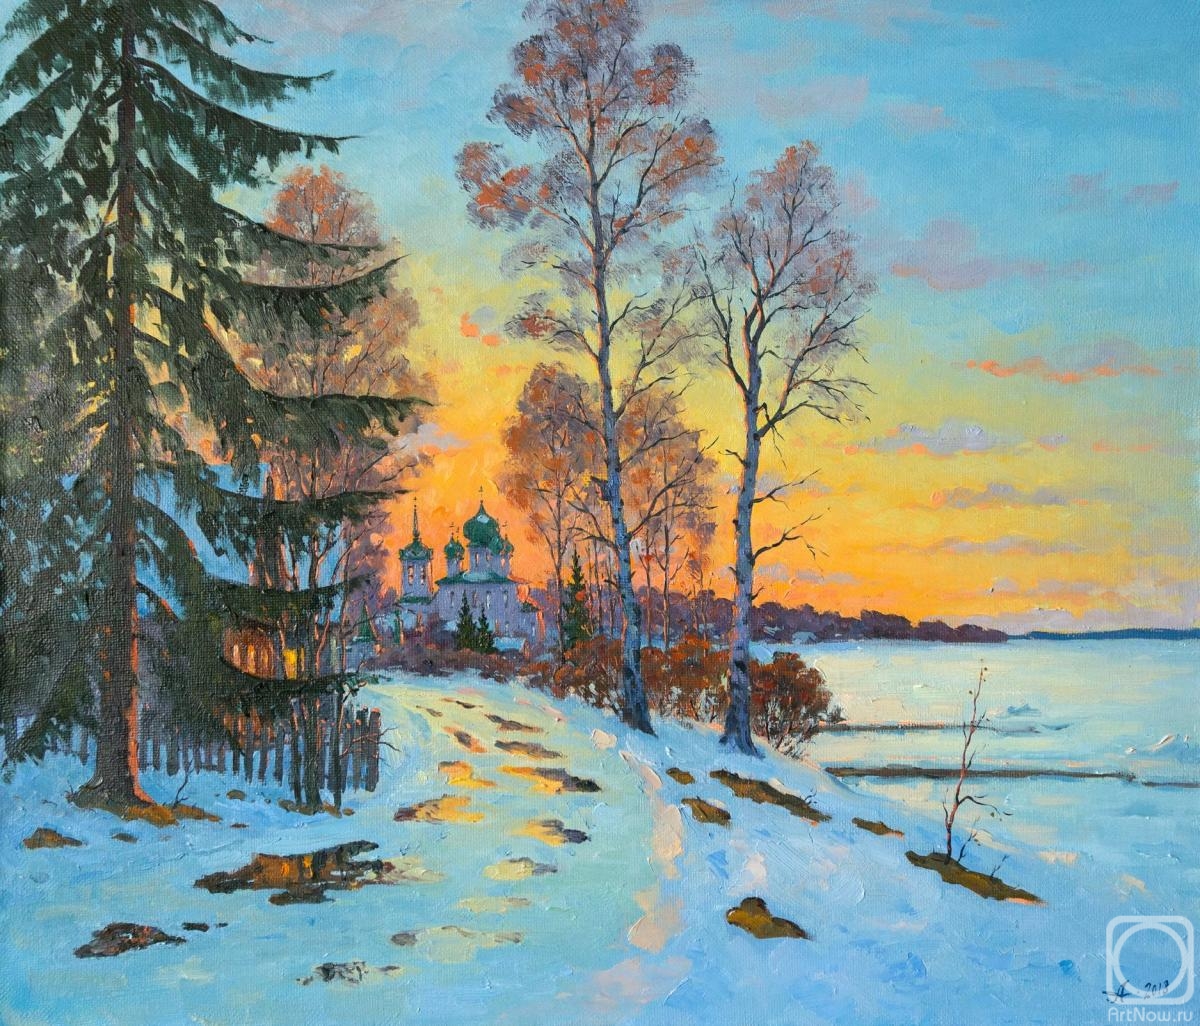 Alexandrovsky Alexander. March in Old Ladoga